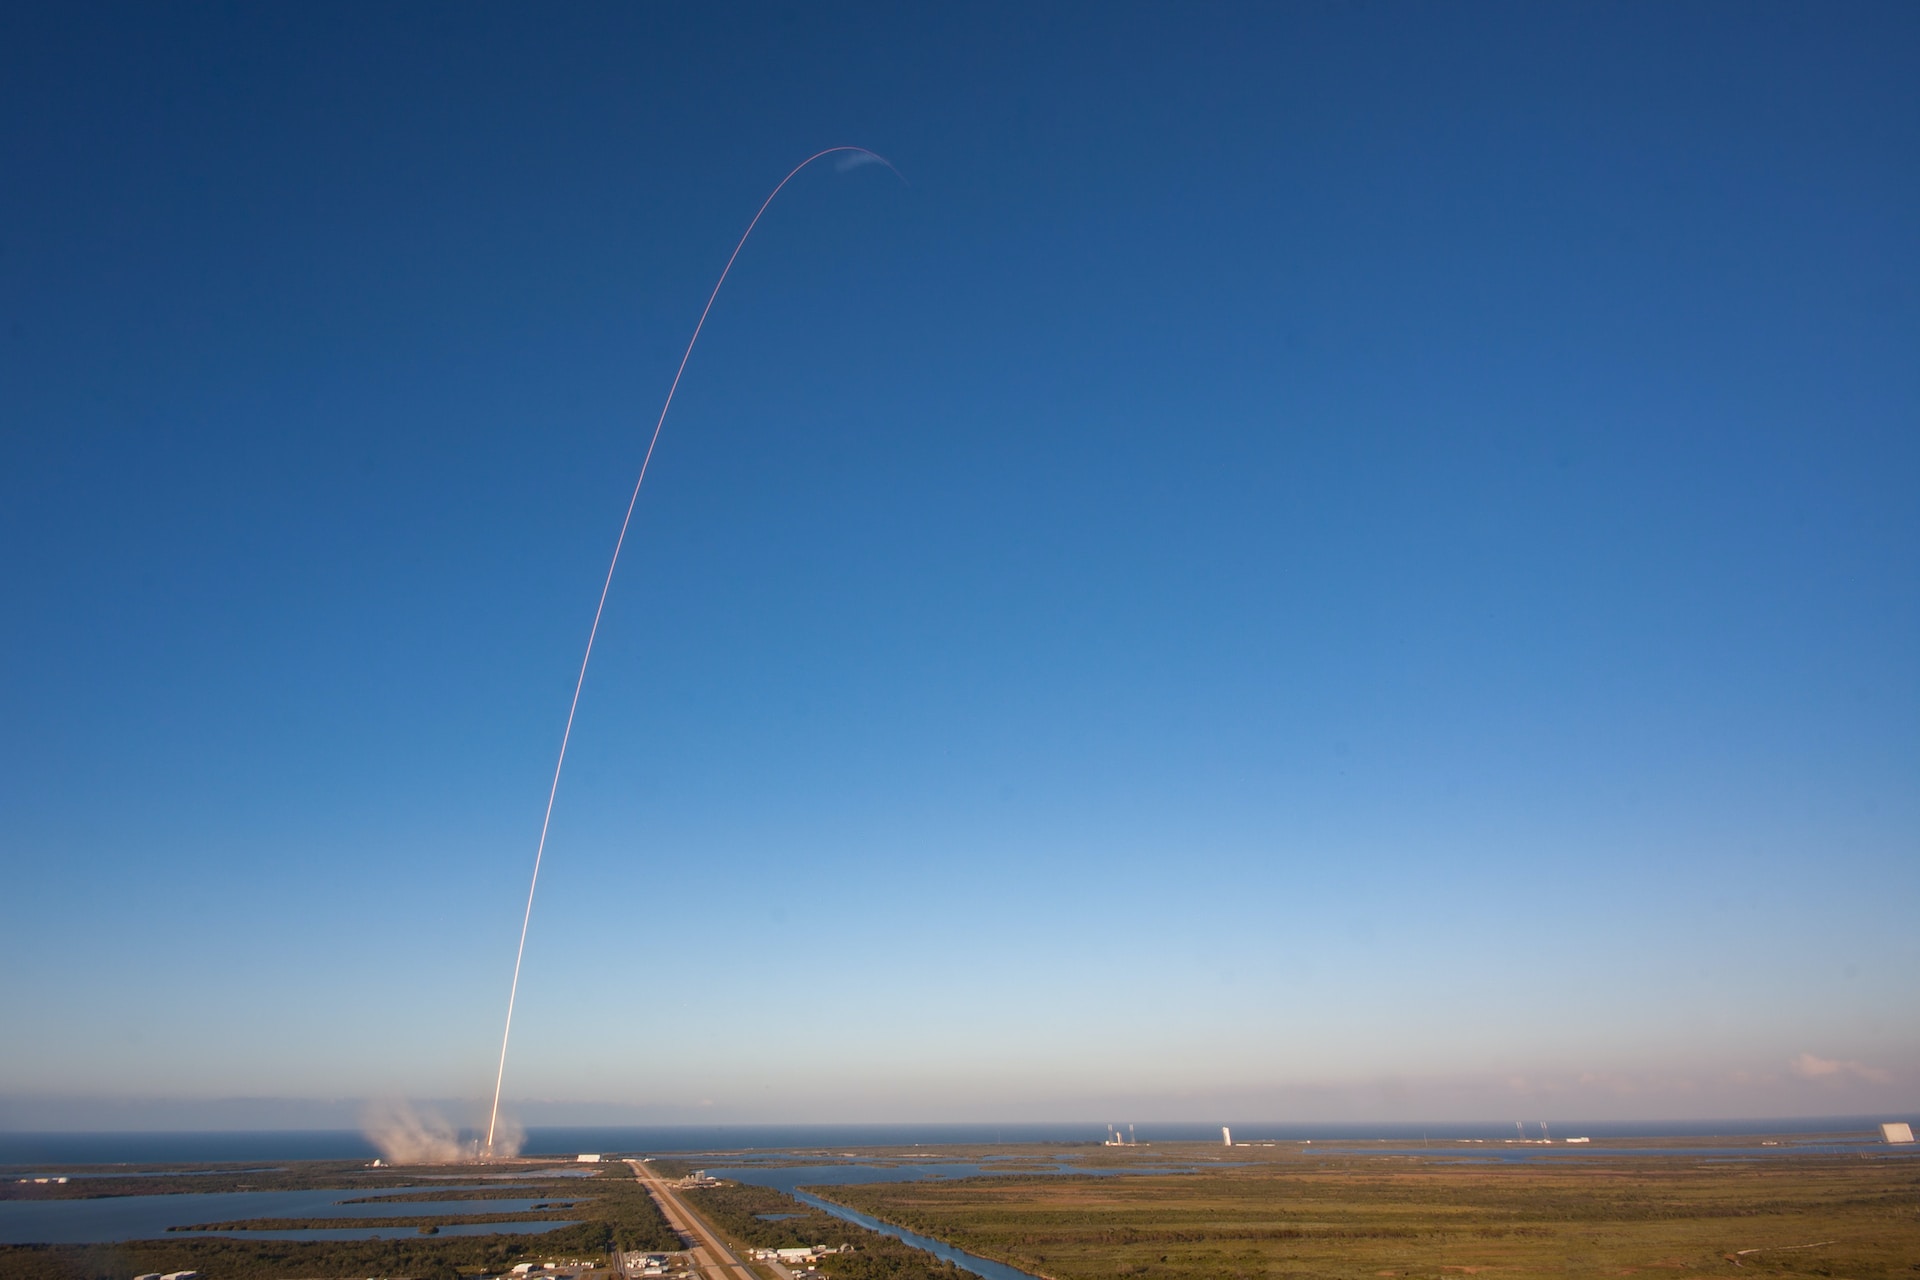 Best Cocoa Beach Hotels for Rocket Launches